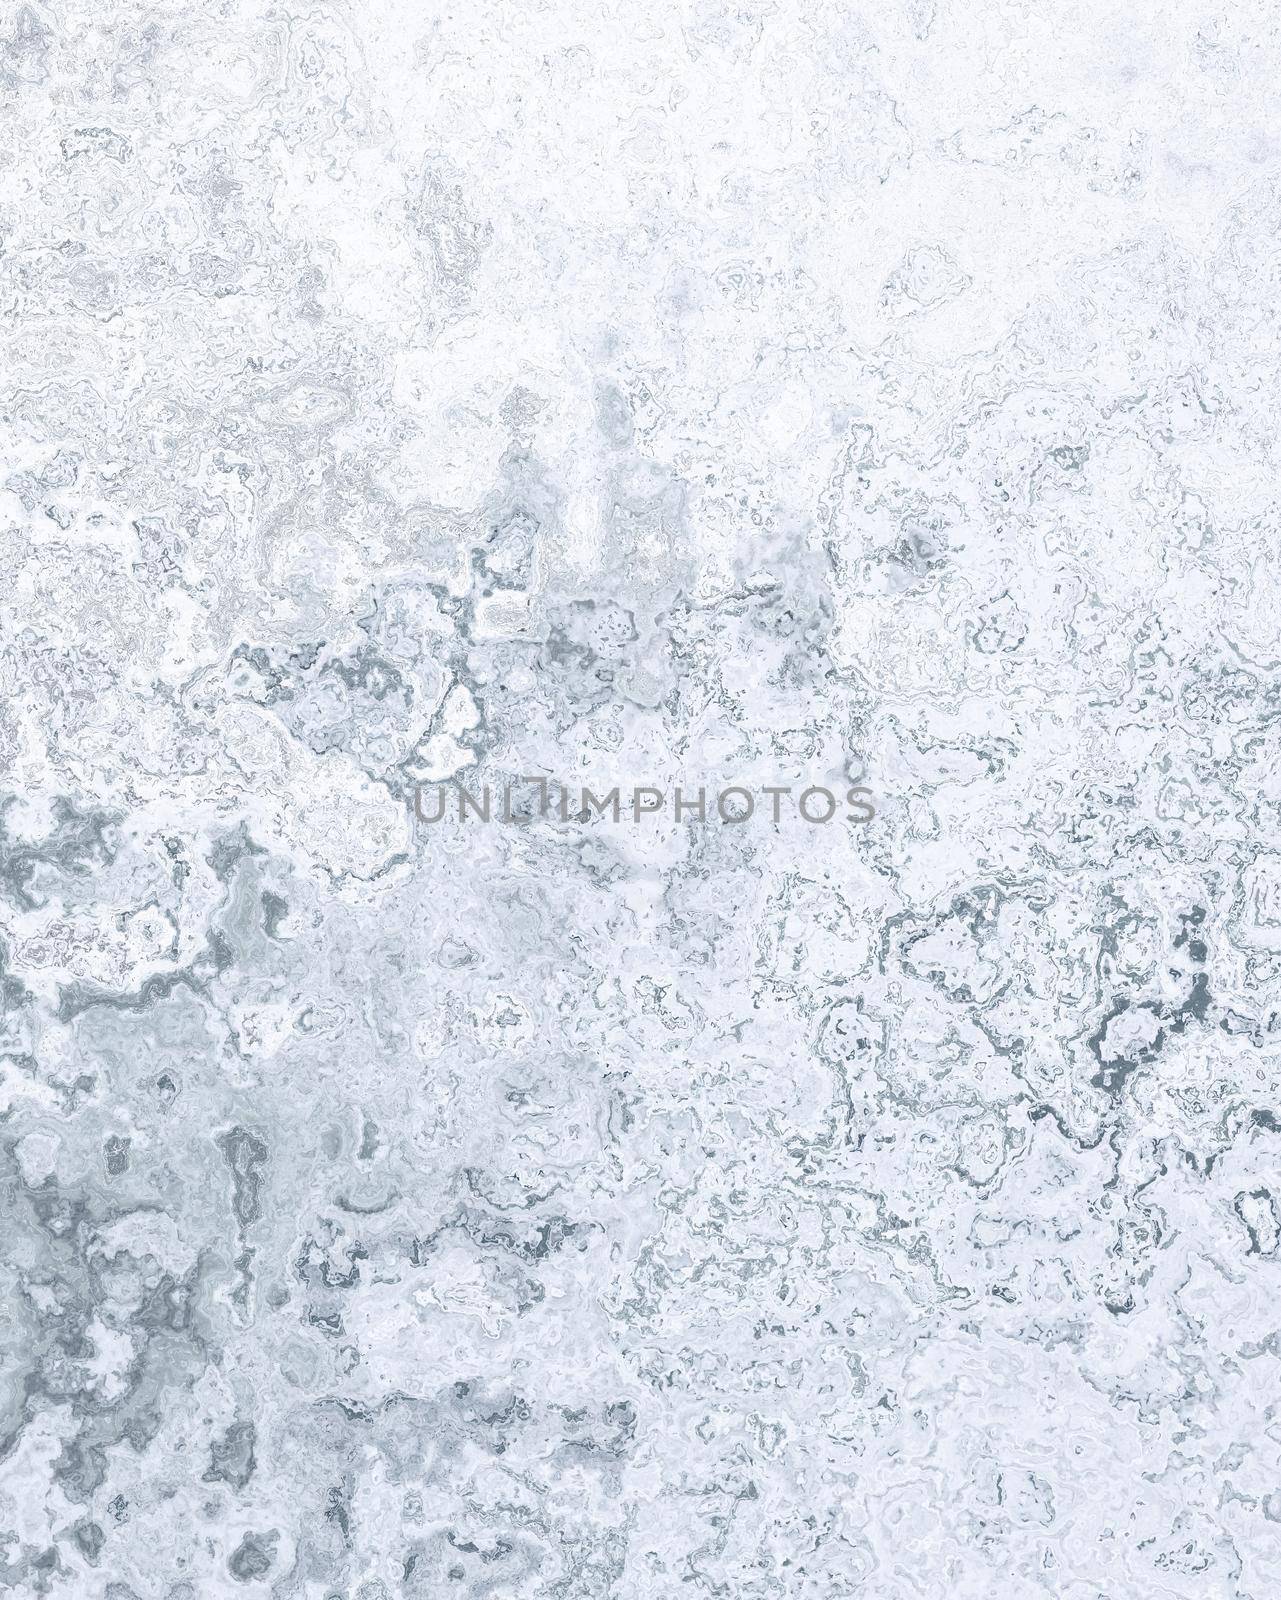 Grey bluish wavy textured layout on solid sheet of wallpaper. Concept of home decor and interior designing by tabishere